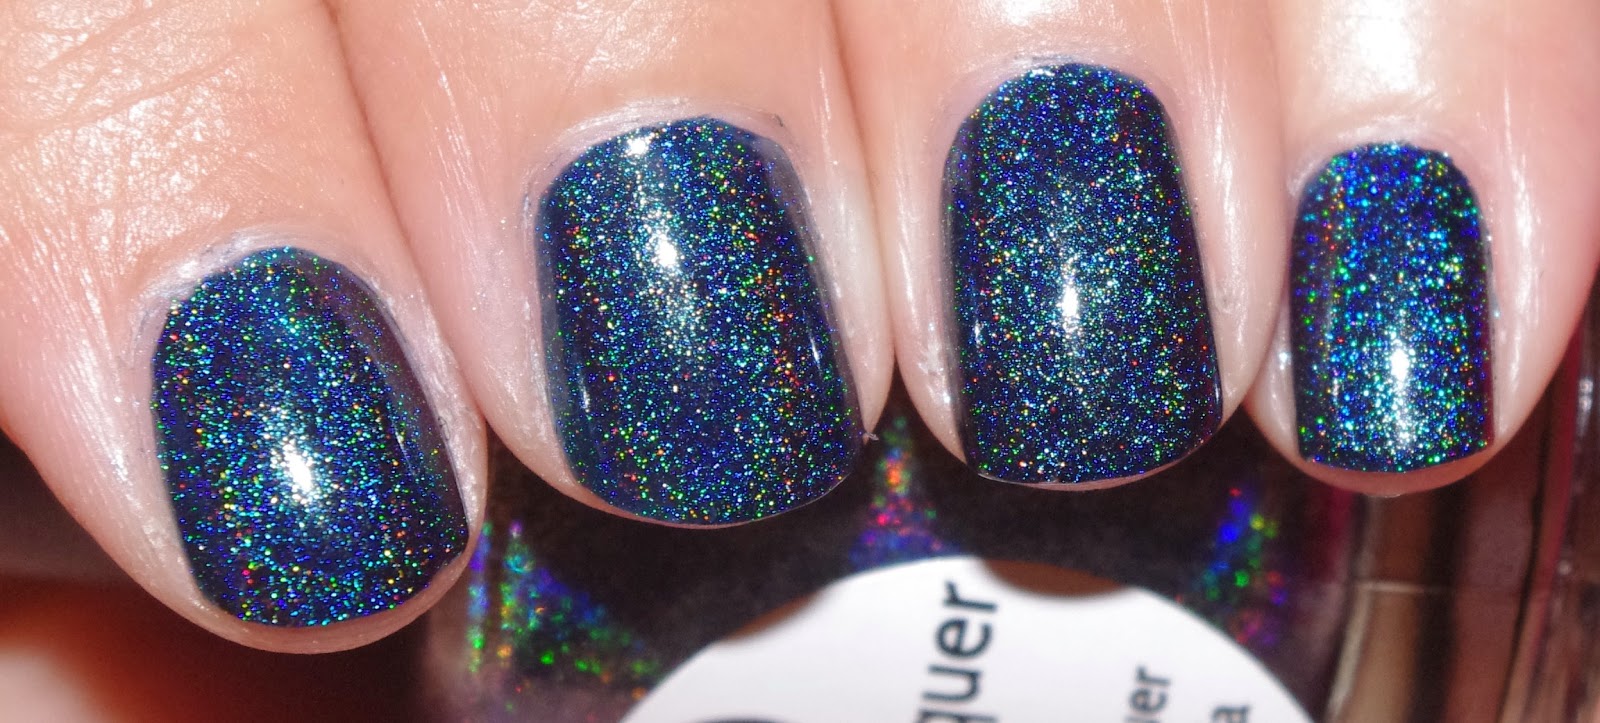 1. DND Gel & Lacquer - Blue Lagoon - wide 2